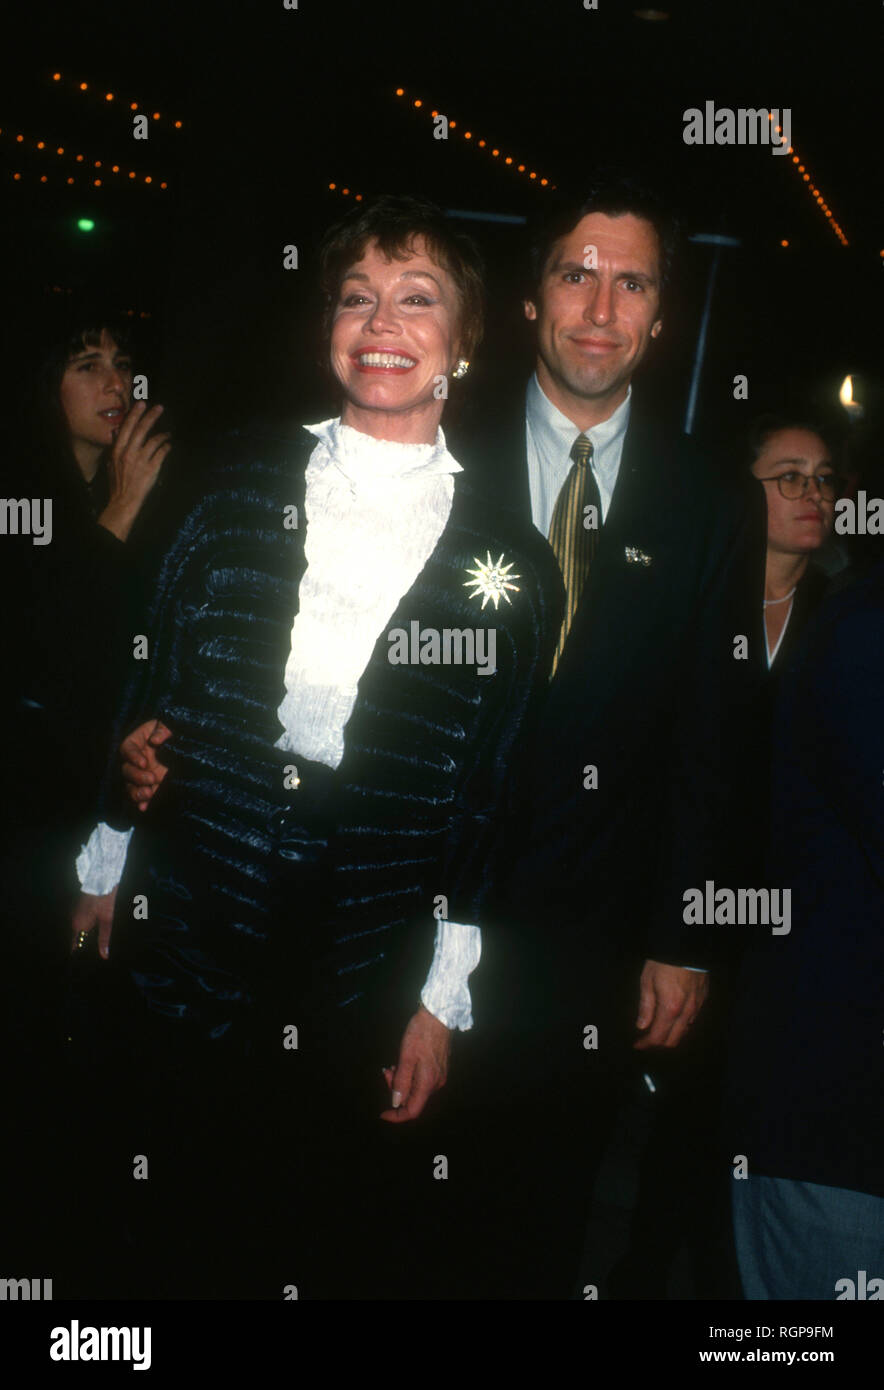 CENTURY CITY,  CA - NOVEMBER 30: Actress Mary Tyler Moore and husband Robert Levine attend Opening Night of 'Sunset Boulevard' on November 30, 1993 at the Shubert Theater in Century City, California. Photo by Barry King/Alamy Stock Photo Stock Photo